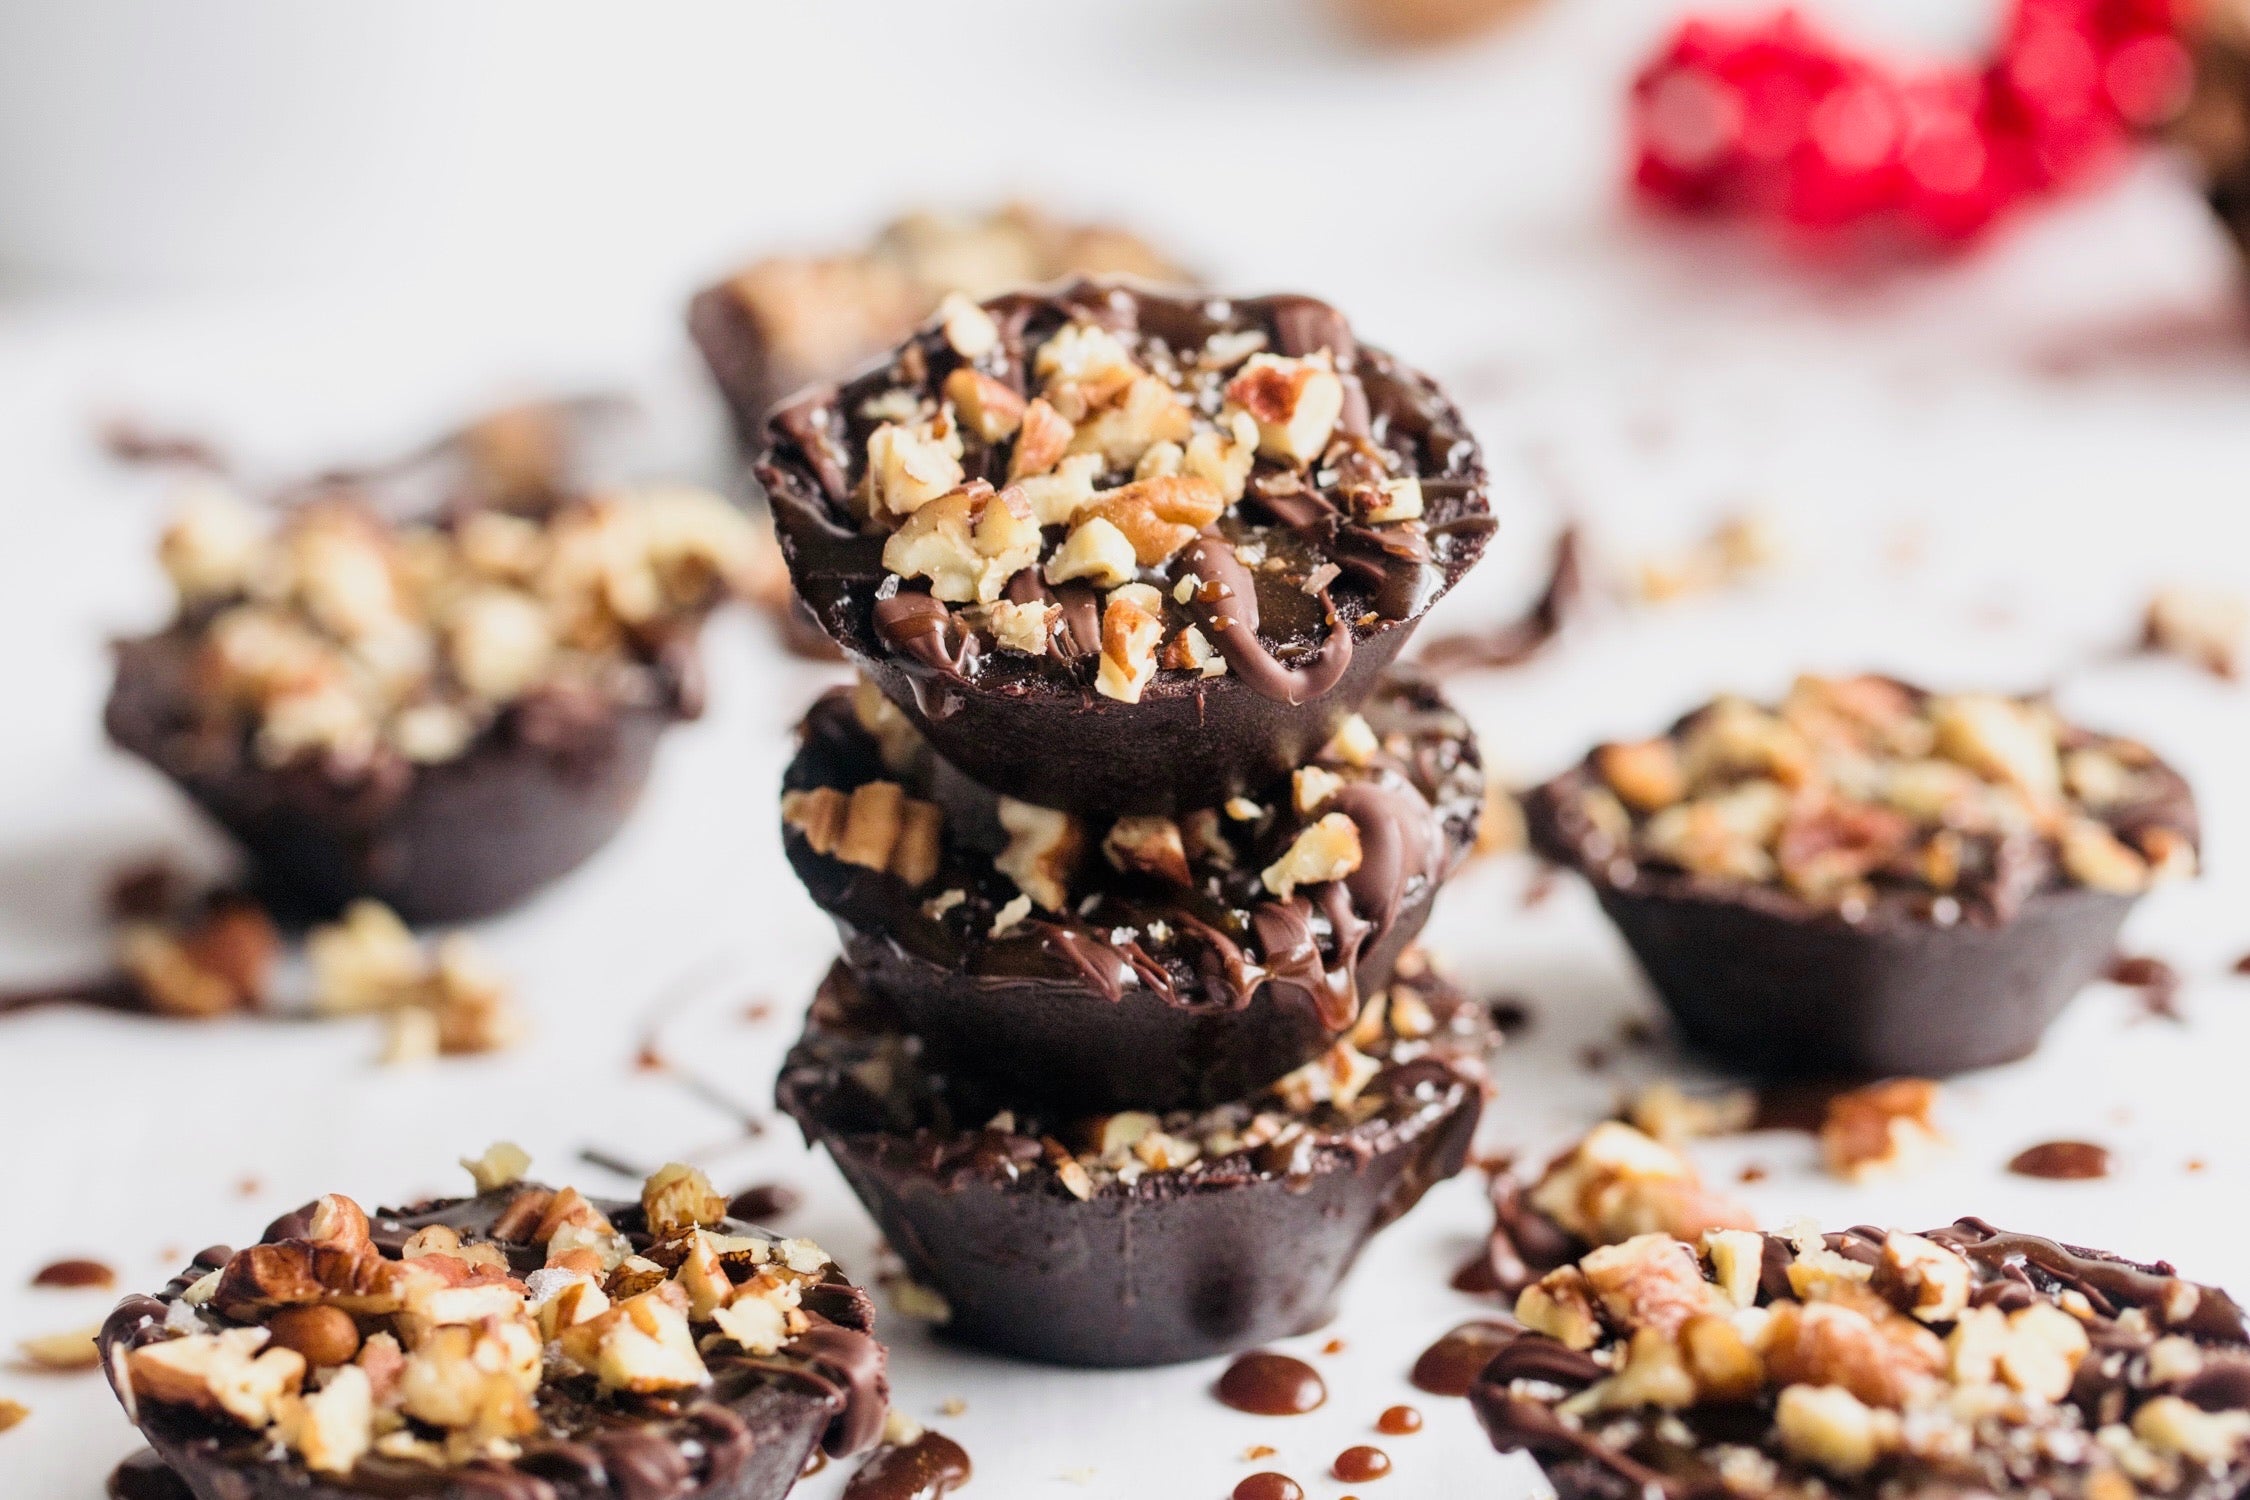 Hail Merry No Bake Keto Chocolate Almond Butter Cups  covered in chocolate, caramel and nuts.  Gluten Free. Low Carb.  Healthy Snacks 